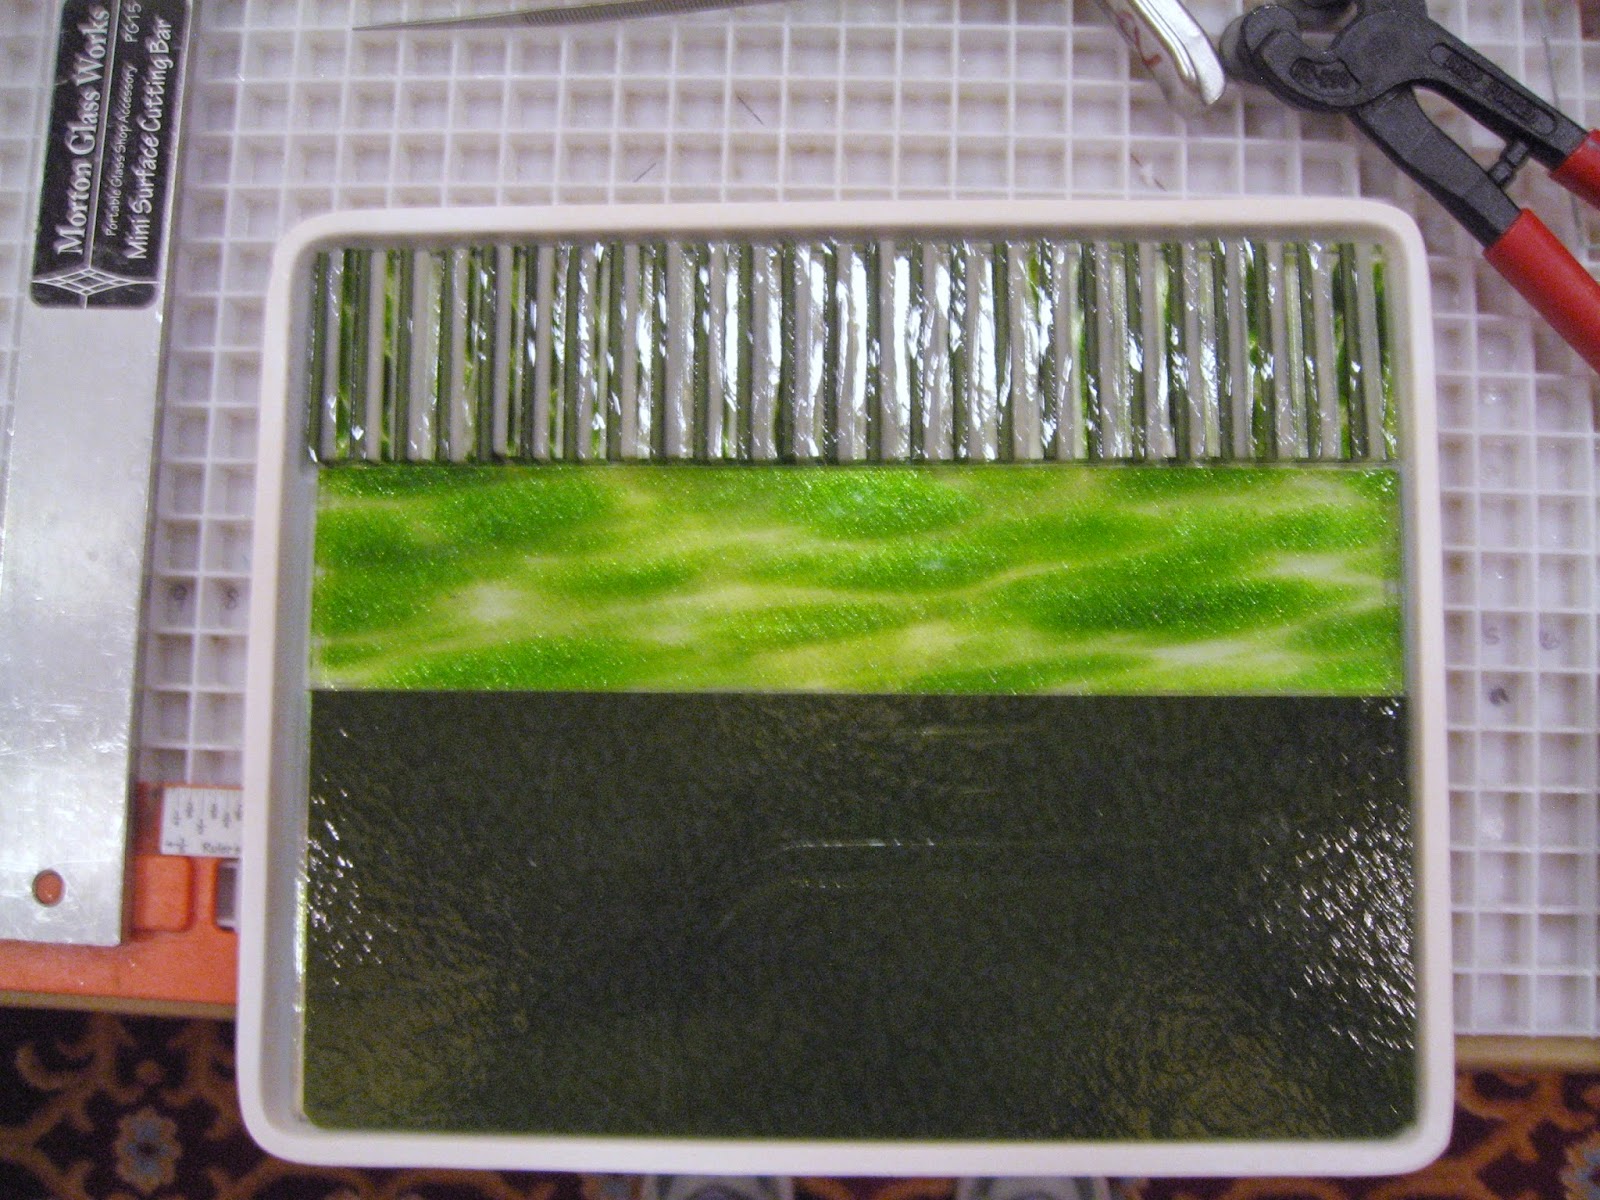 Roll-up panel prior to fusing